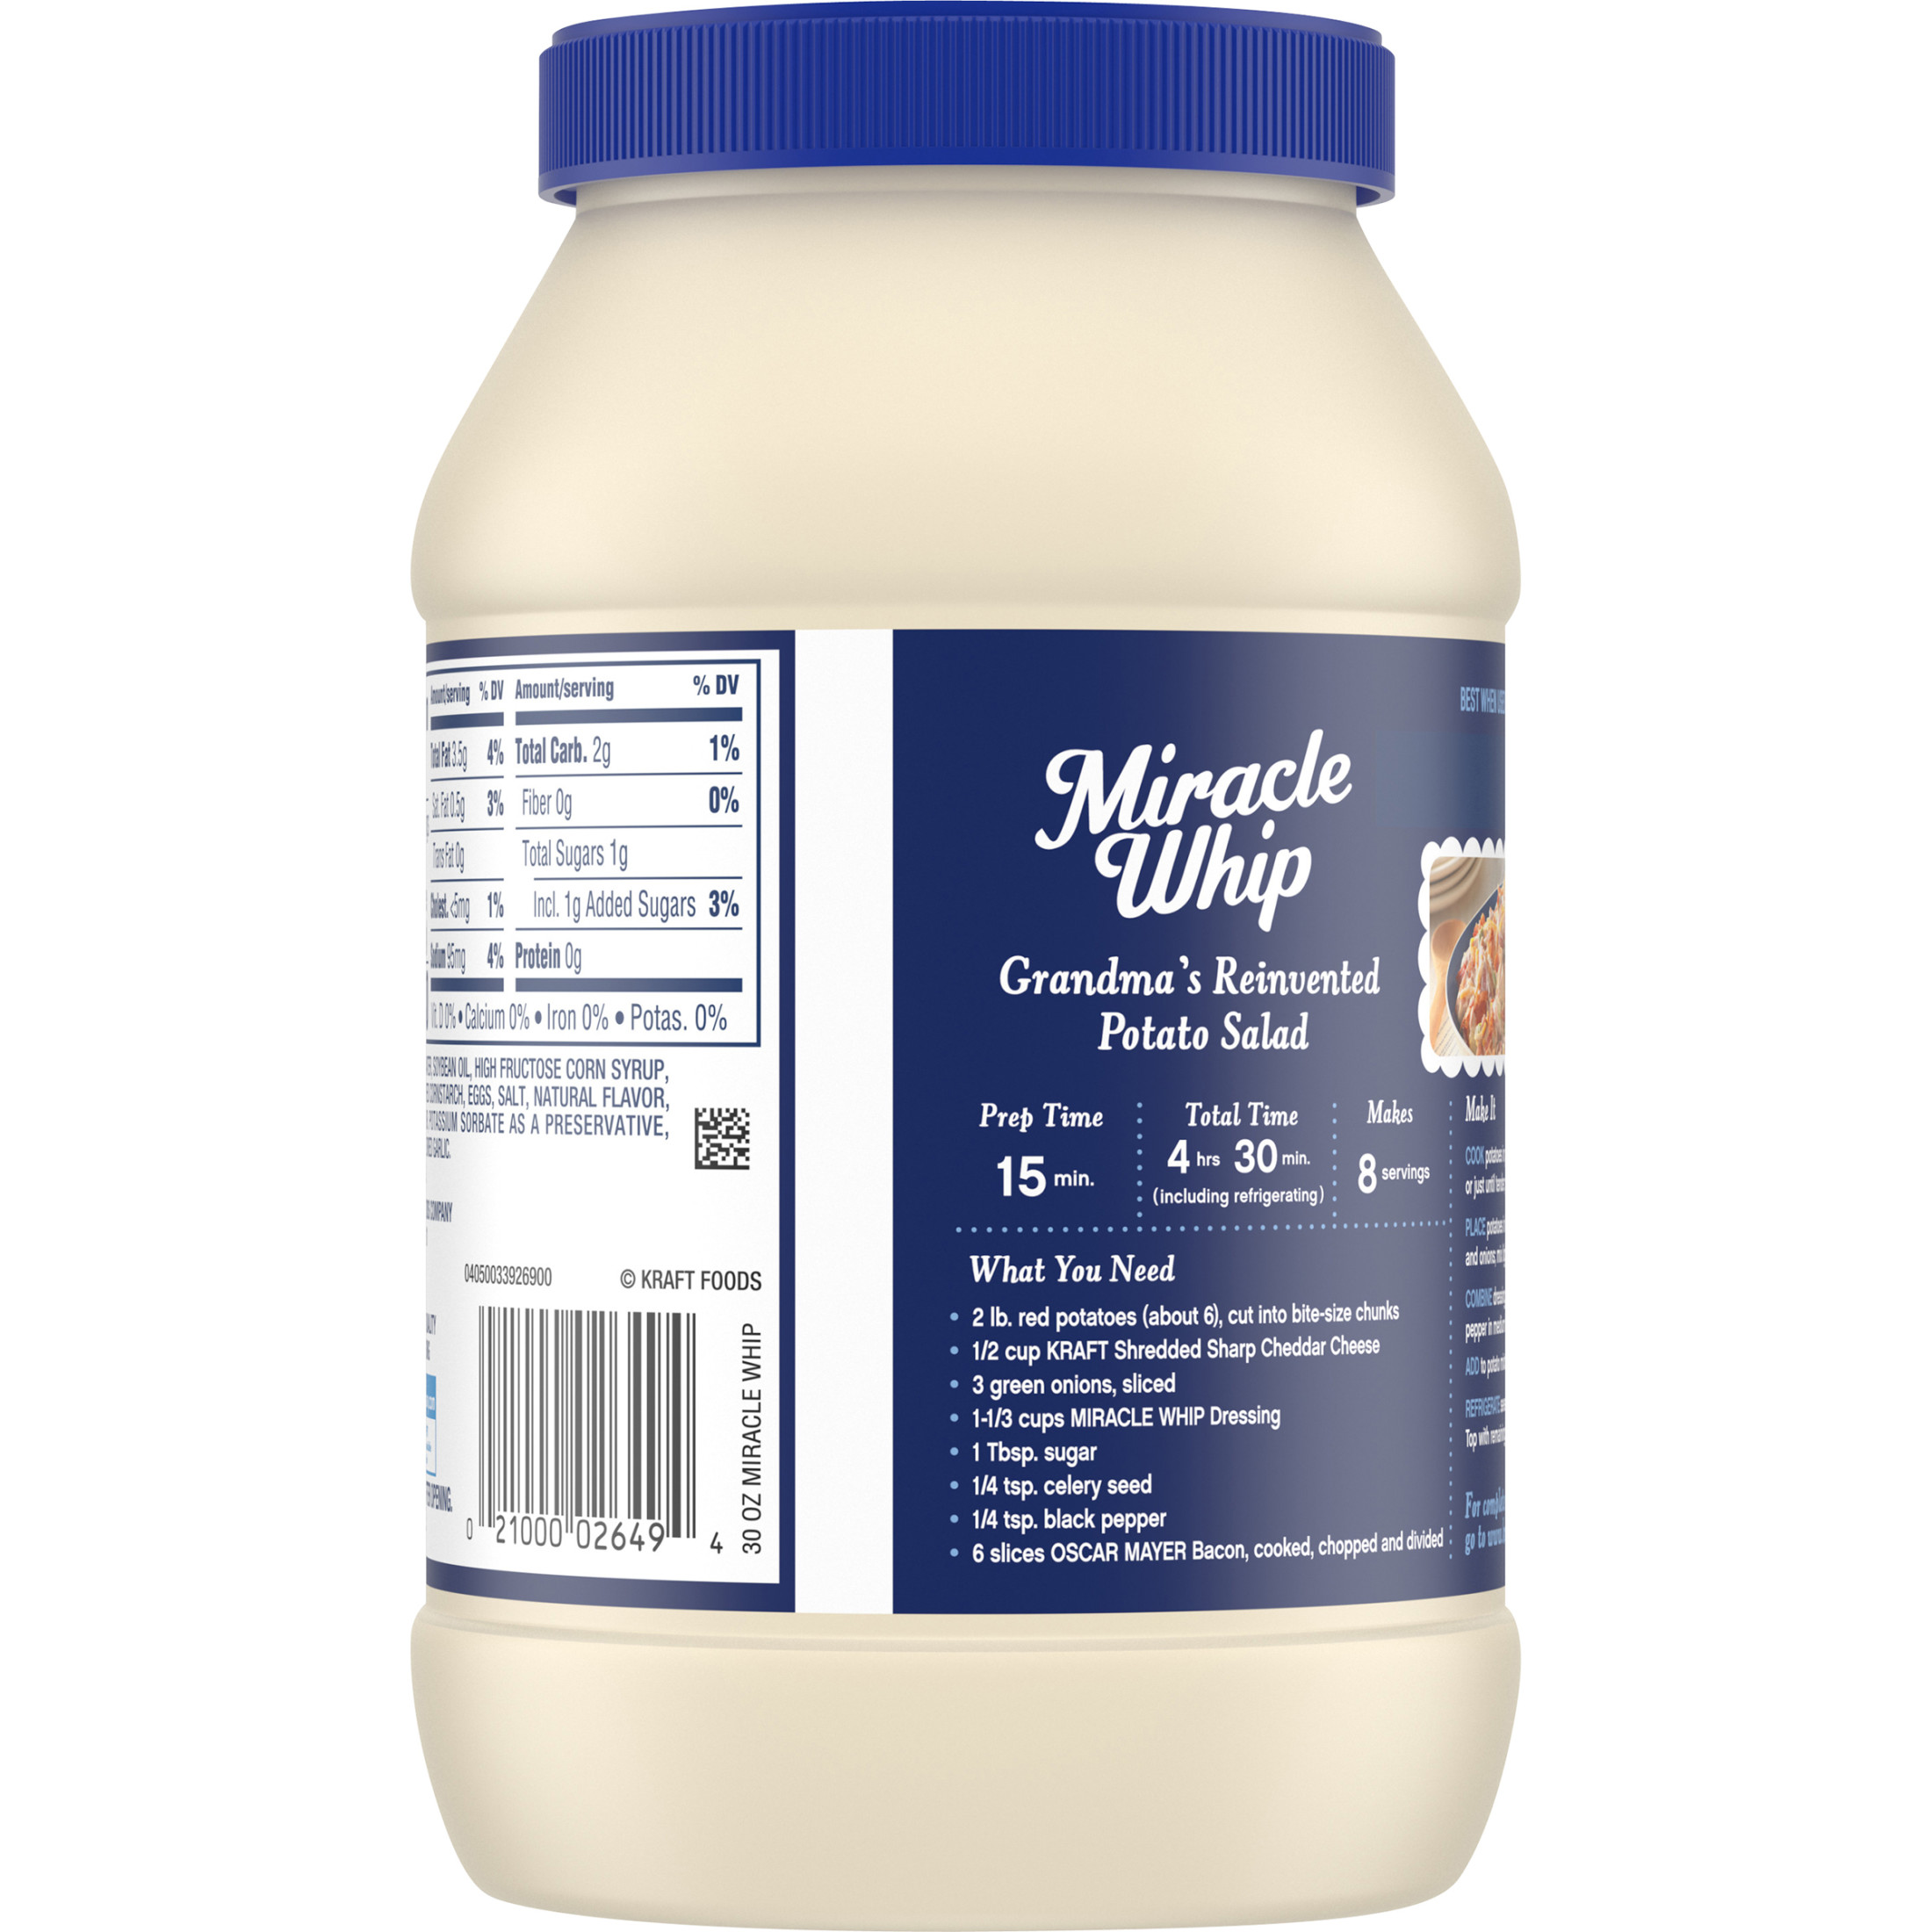 Miracle Whip Mayo-like Dressing, for a Keto and Low Carb Lifestyle, 30 fl oz Jar - image 12 of 16